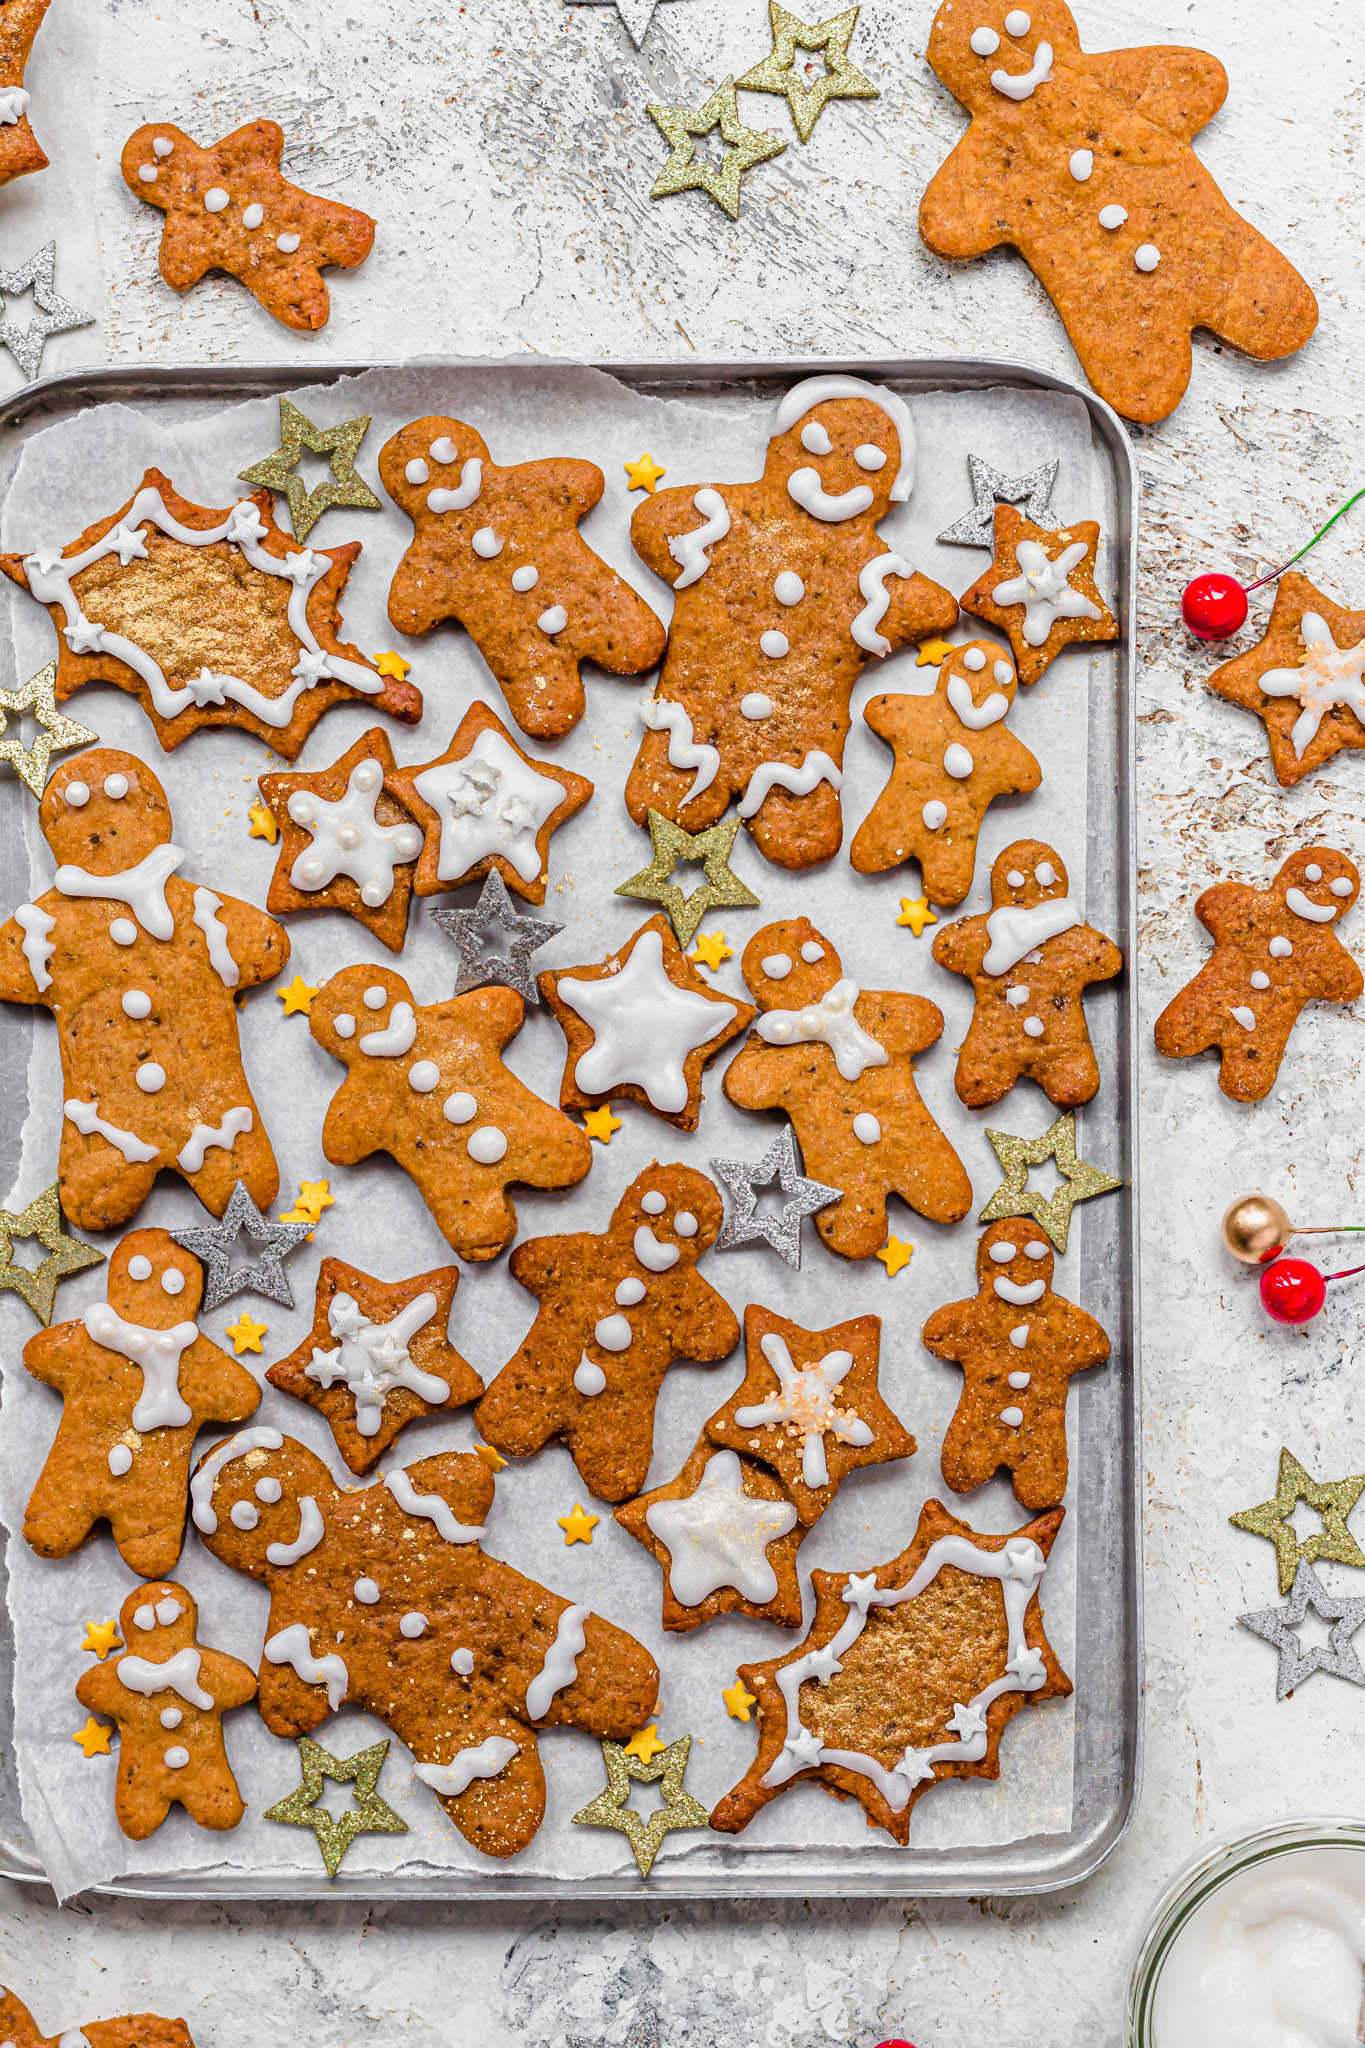 Vegan Gingerbread Wreath and Shapes